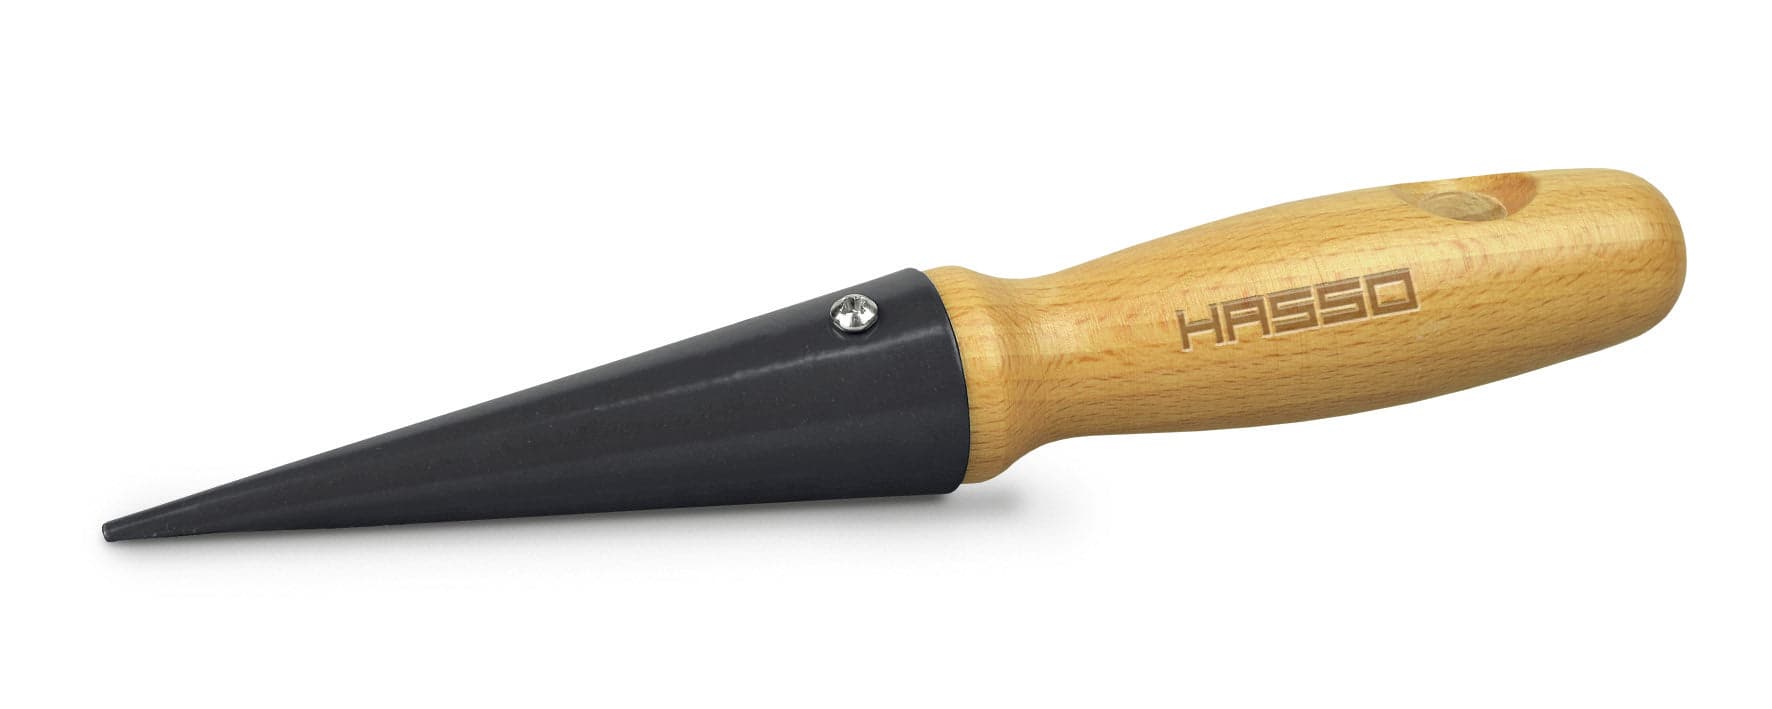 HASSO PLANTER WITH WOODEN HANDLE